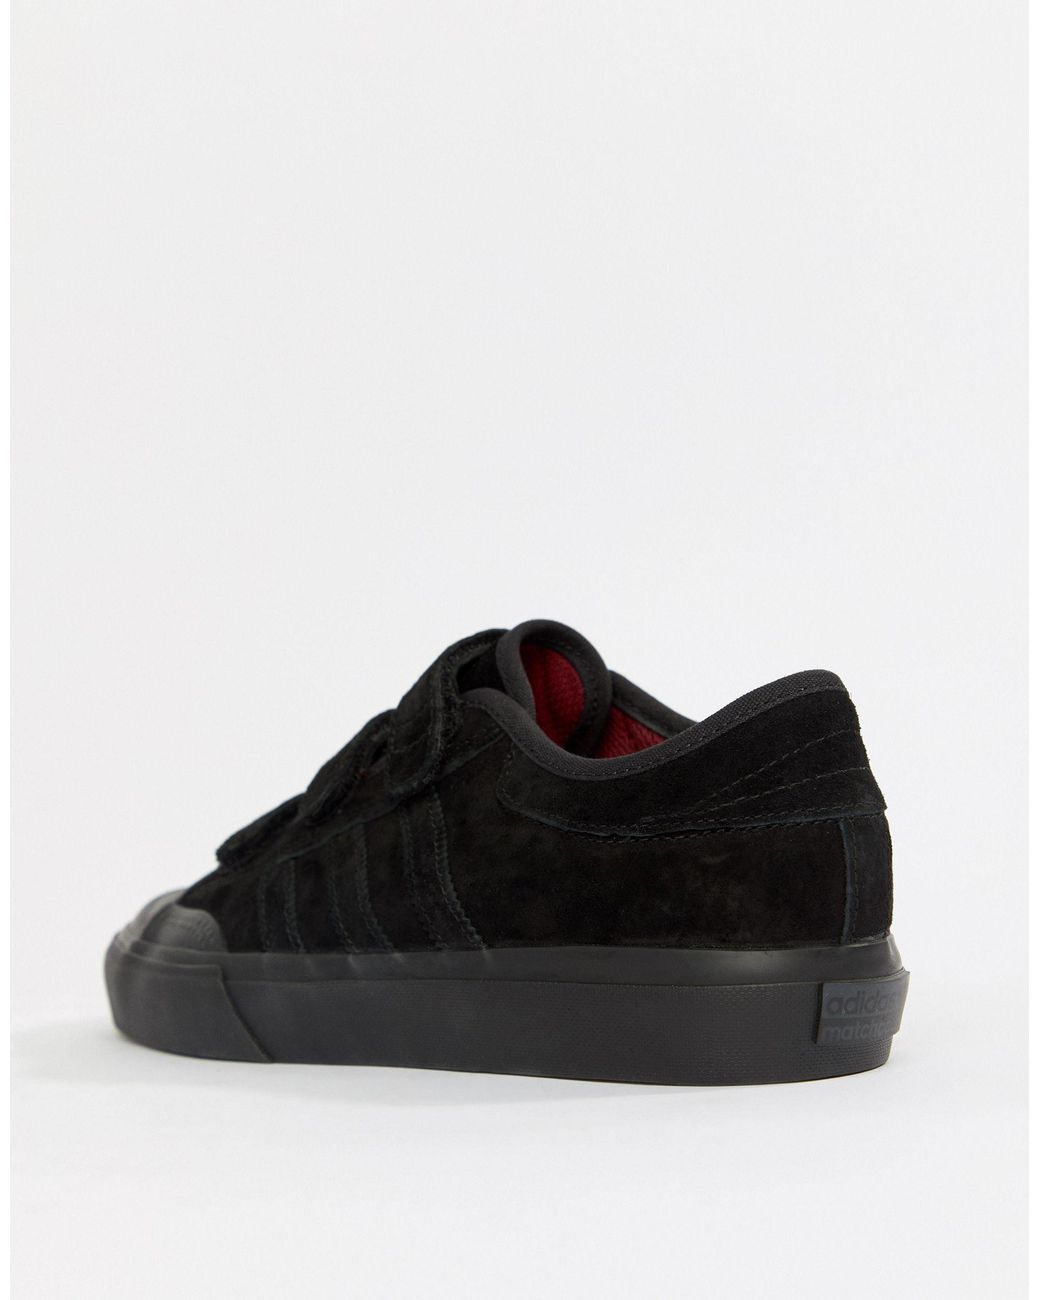 Fearless Sovereign Revival adidas Originals Adidas Skate Boarding Matchcourt Cf Sneakers With Straps  in Black | Lyst